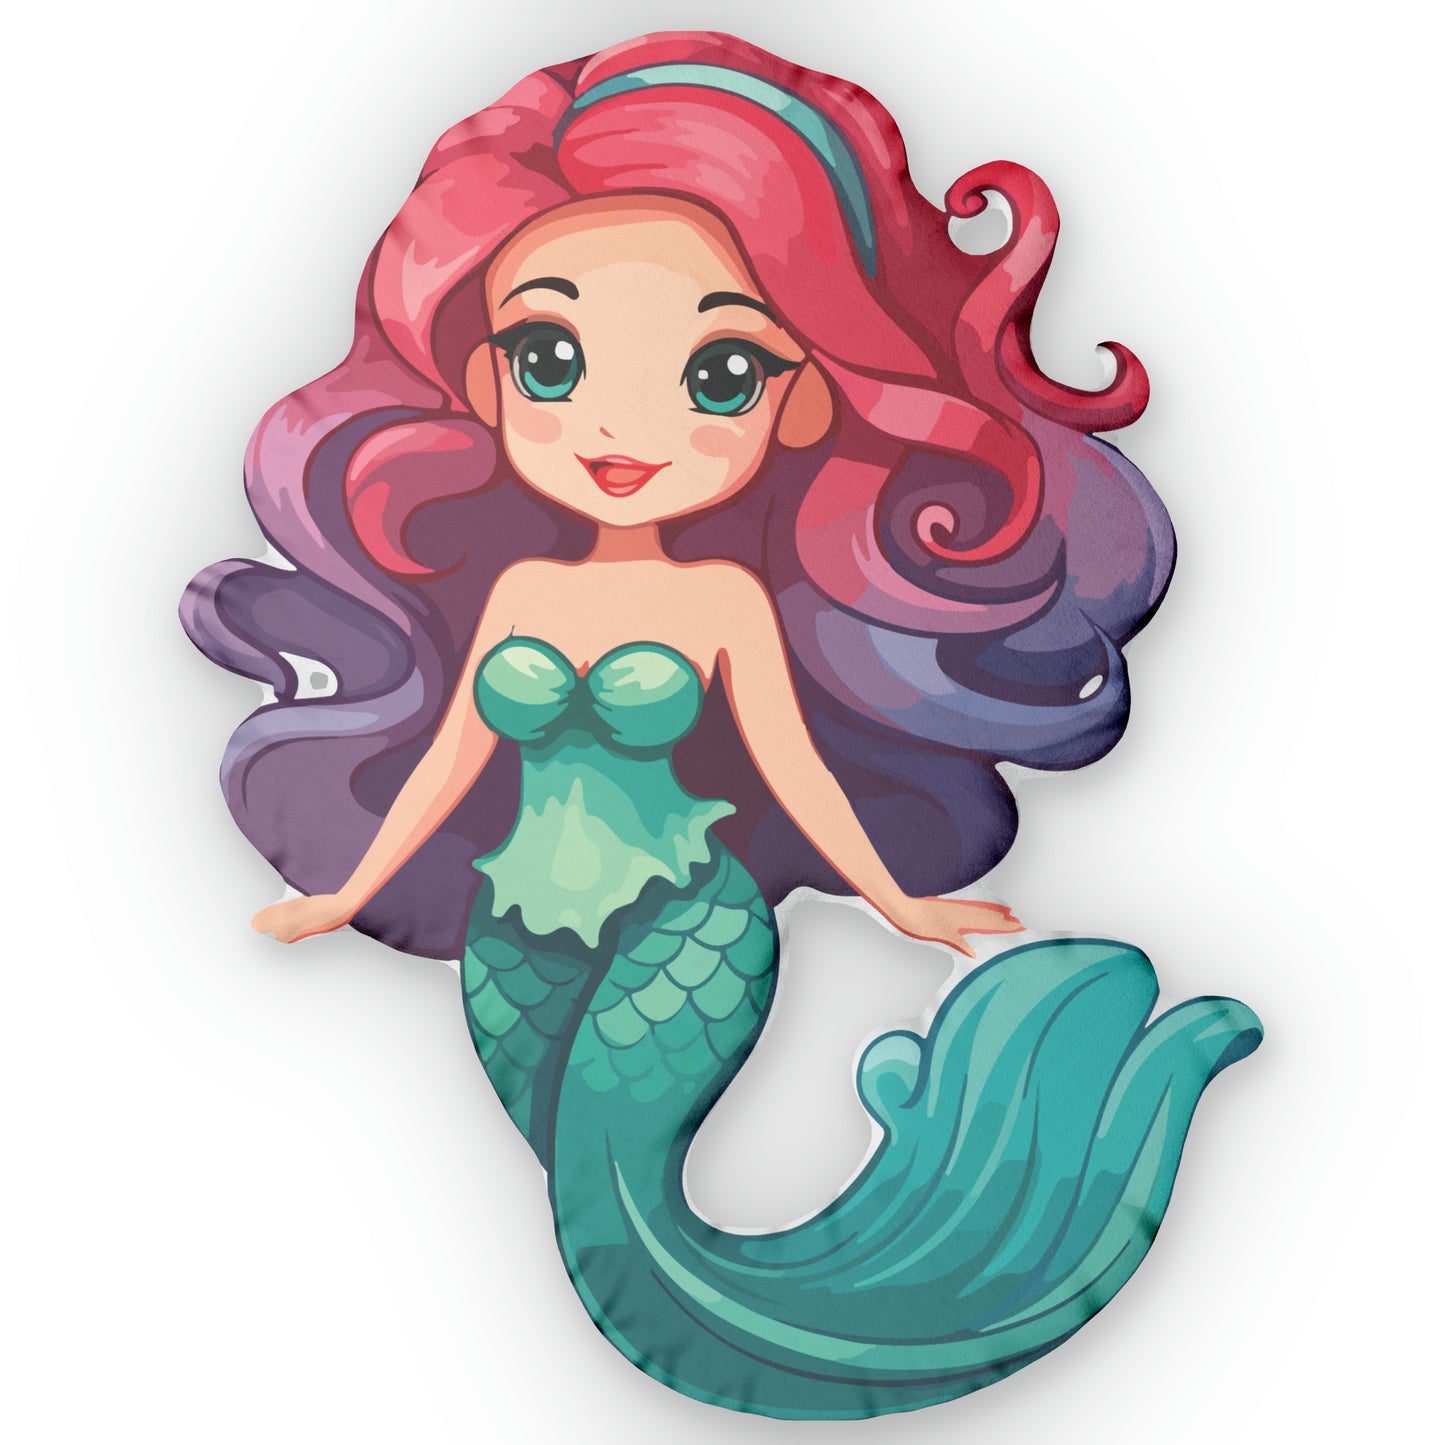 Retro mermaid girl is wearing a teal green skirt/tail and strapless top - red & purple long swingy hair and teal blue big sweet eyes - a cuddle-buddy pillow doll in 4 sizes up to 28 inches tall - minky soft and comforting to cuddle - small is perfect for traveling as a comfort-buddy that will start conversations yes! So fun!